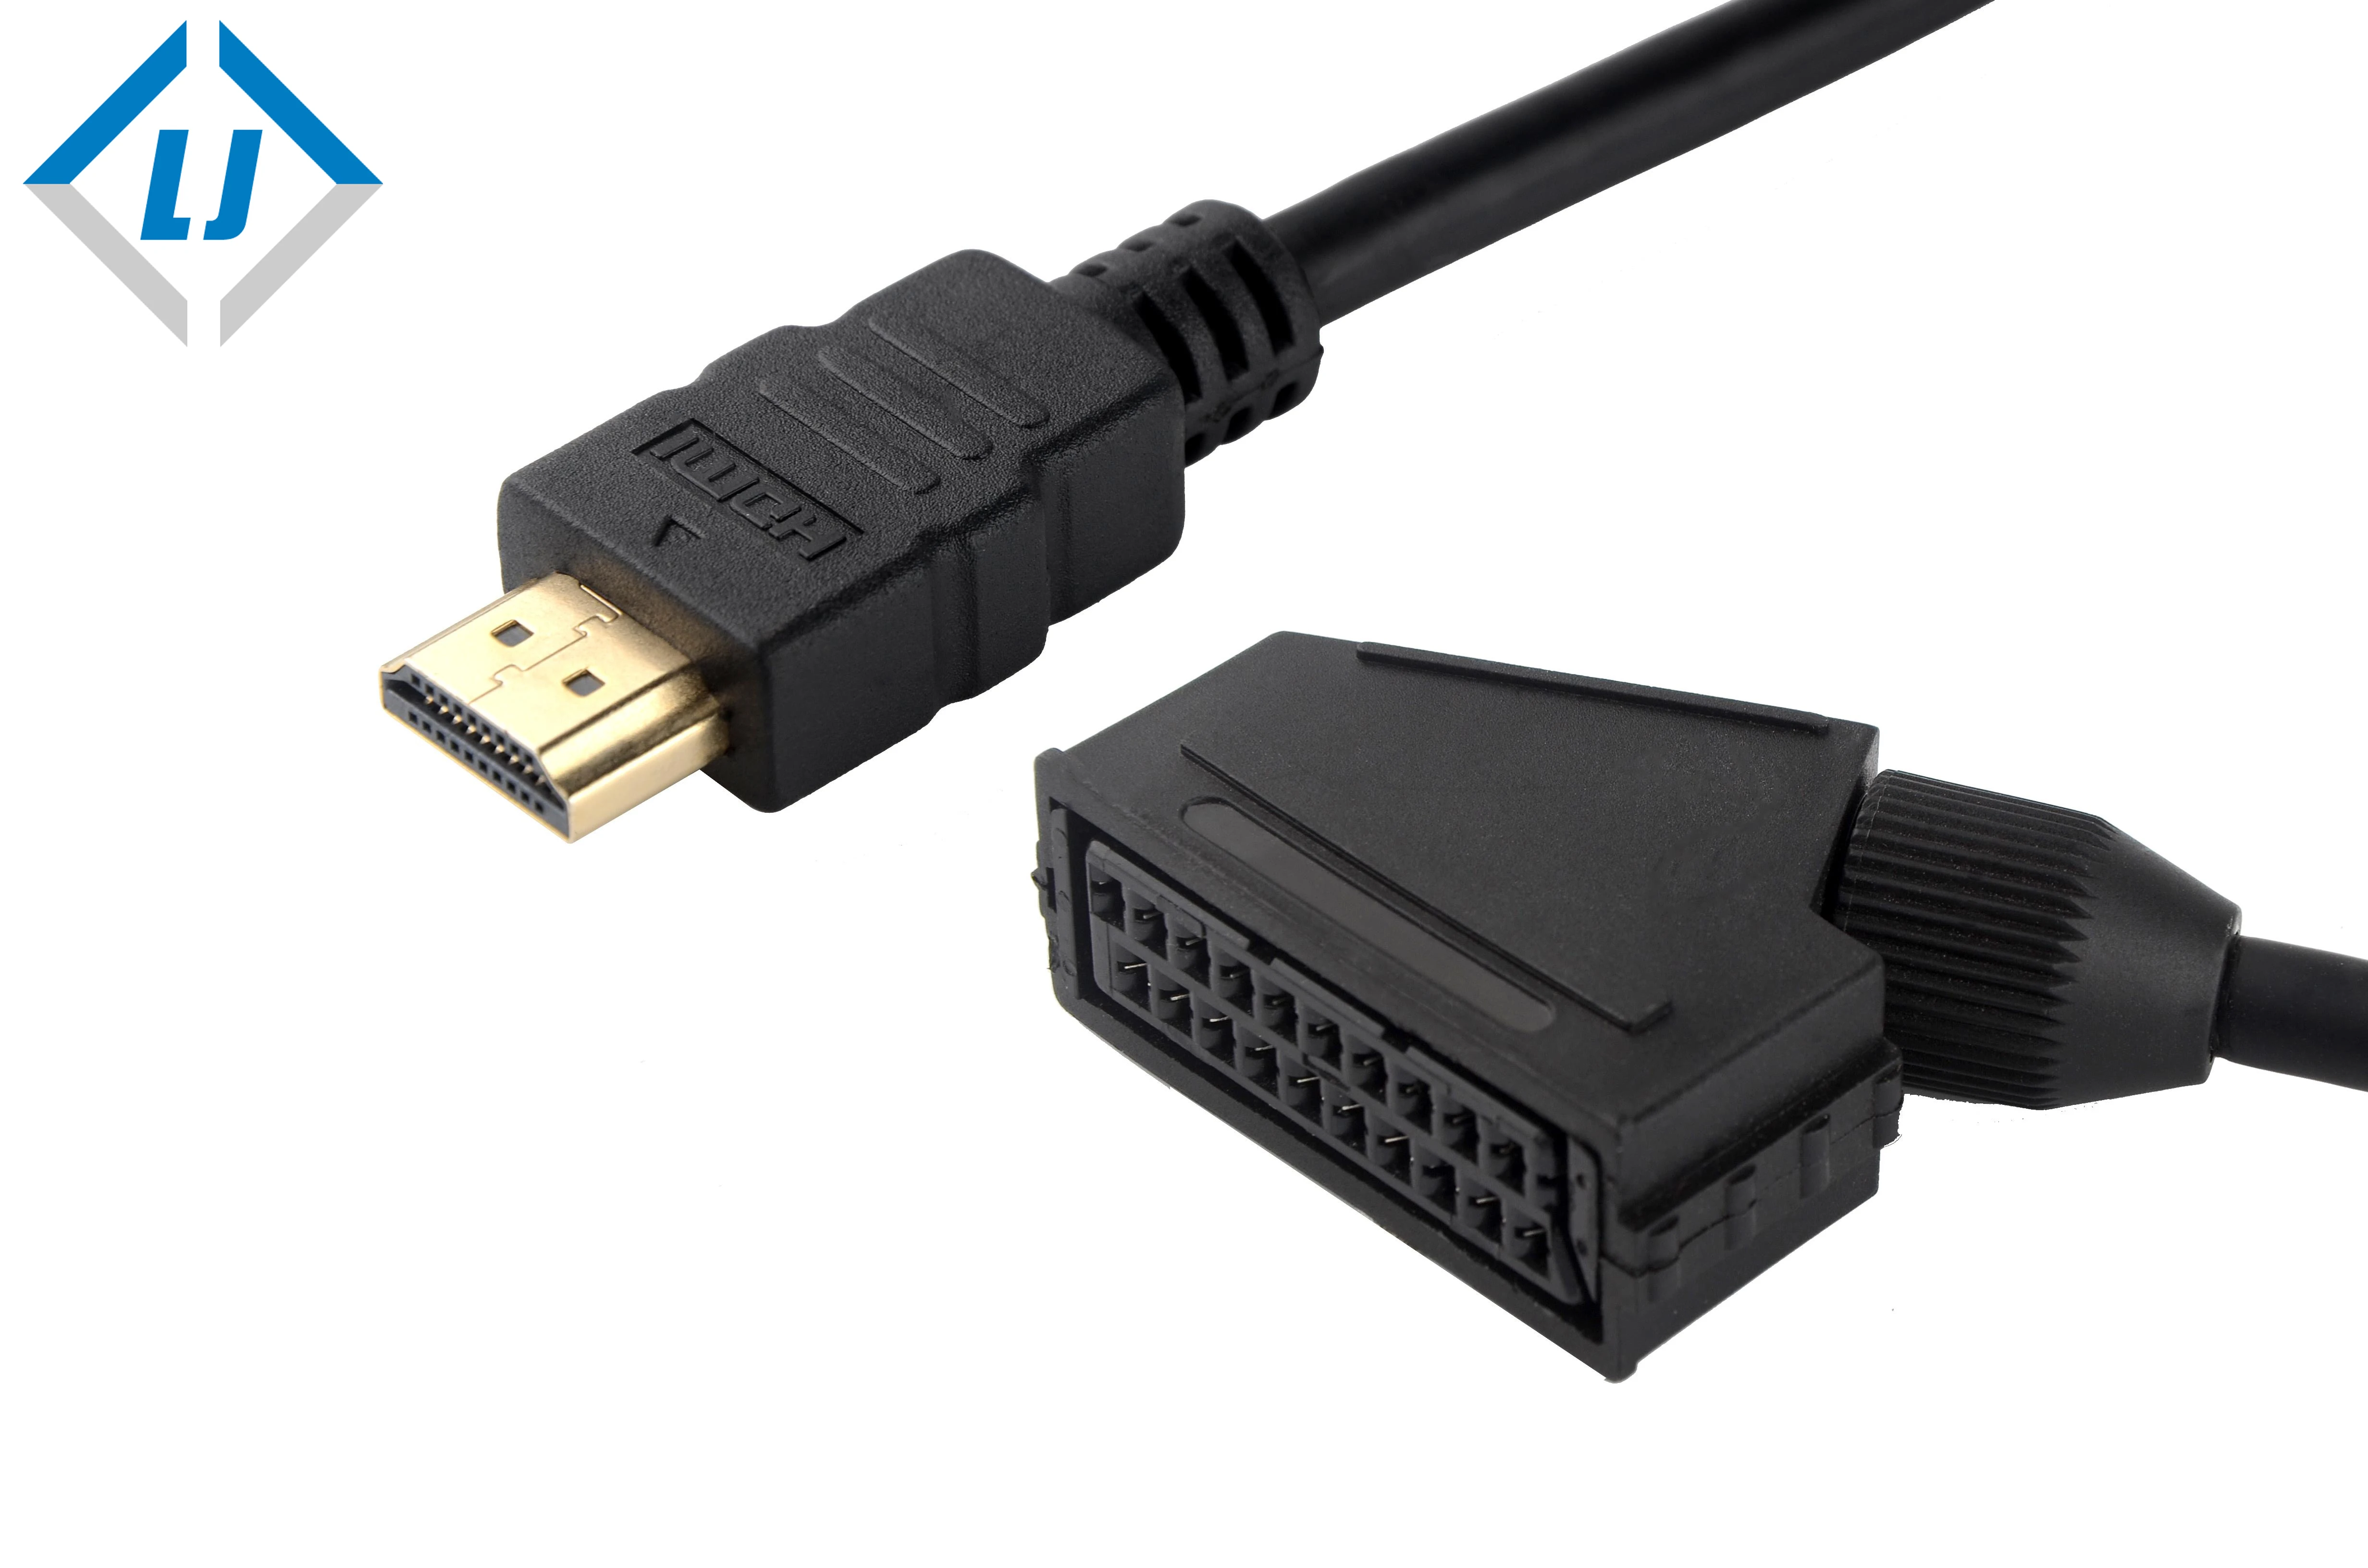 HDMI to Scart - Lining